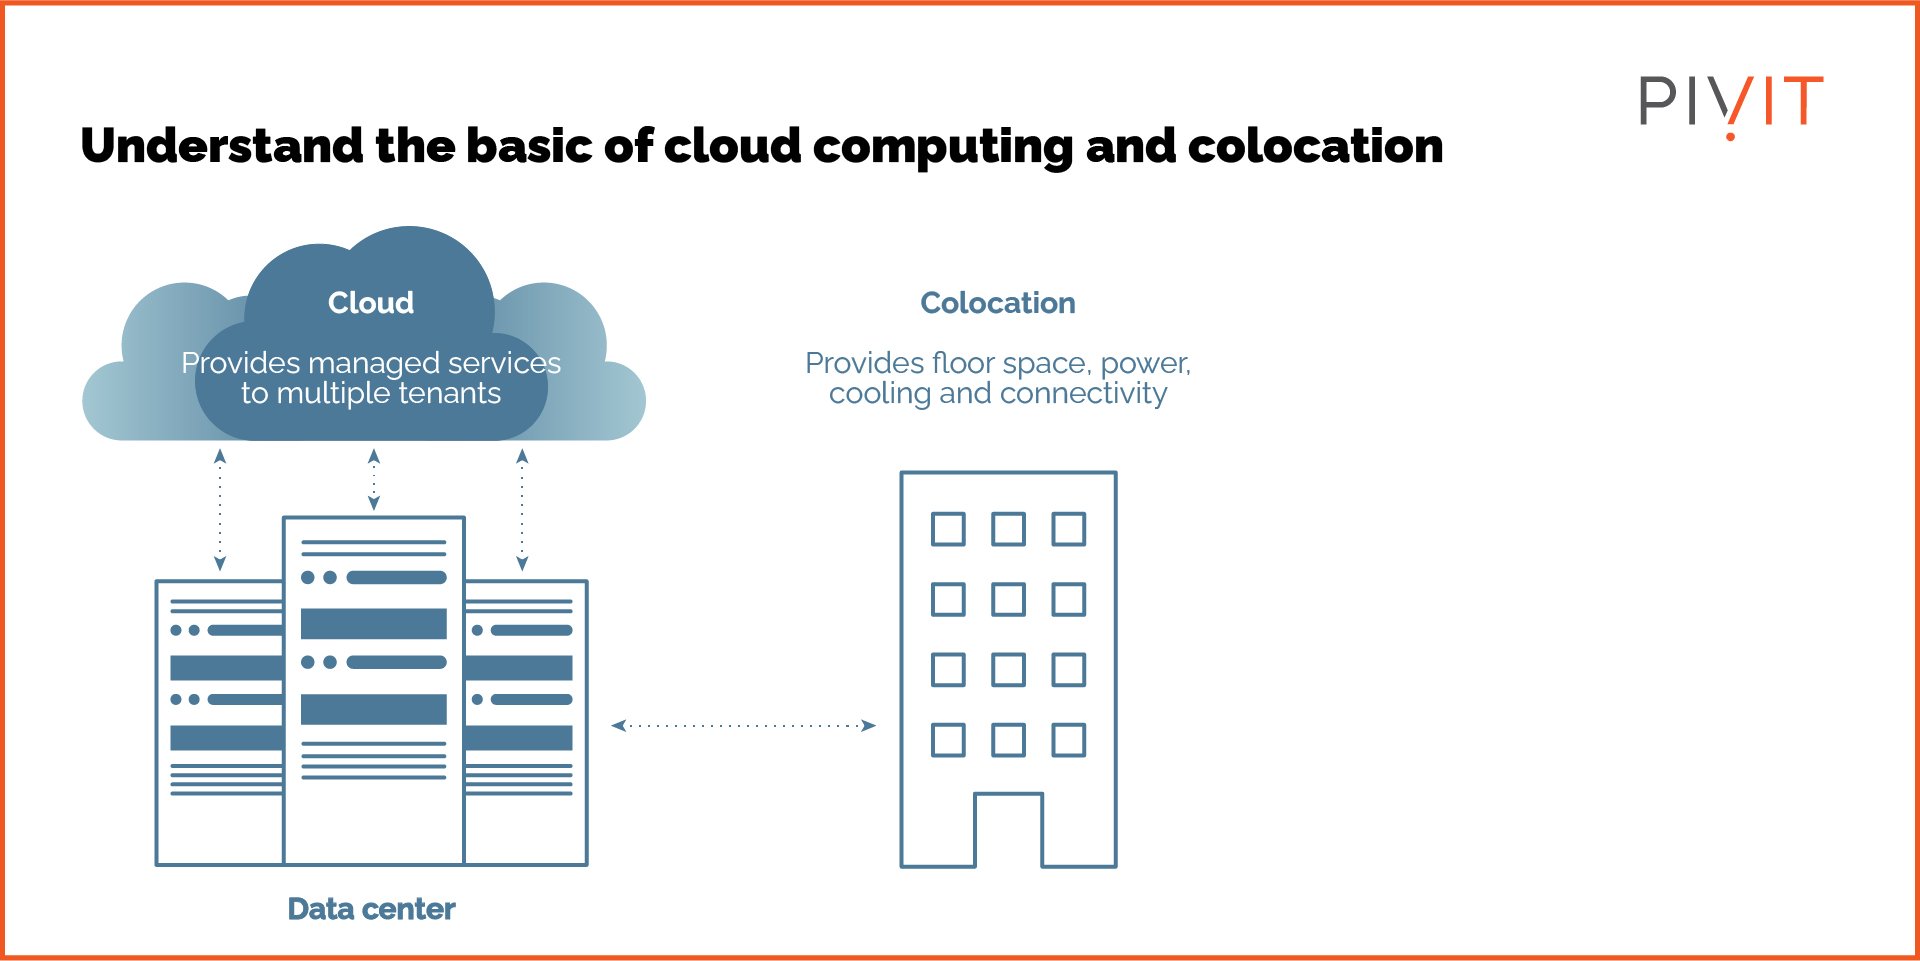 Understand the basic of cloud computing and colocation